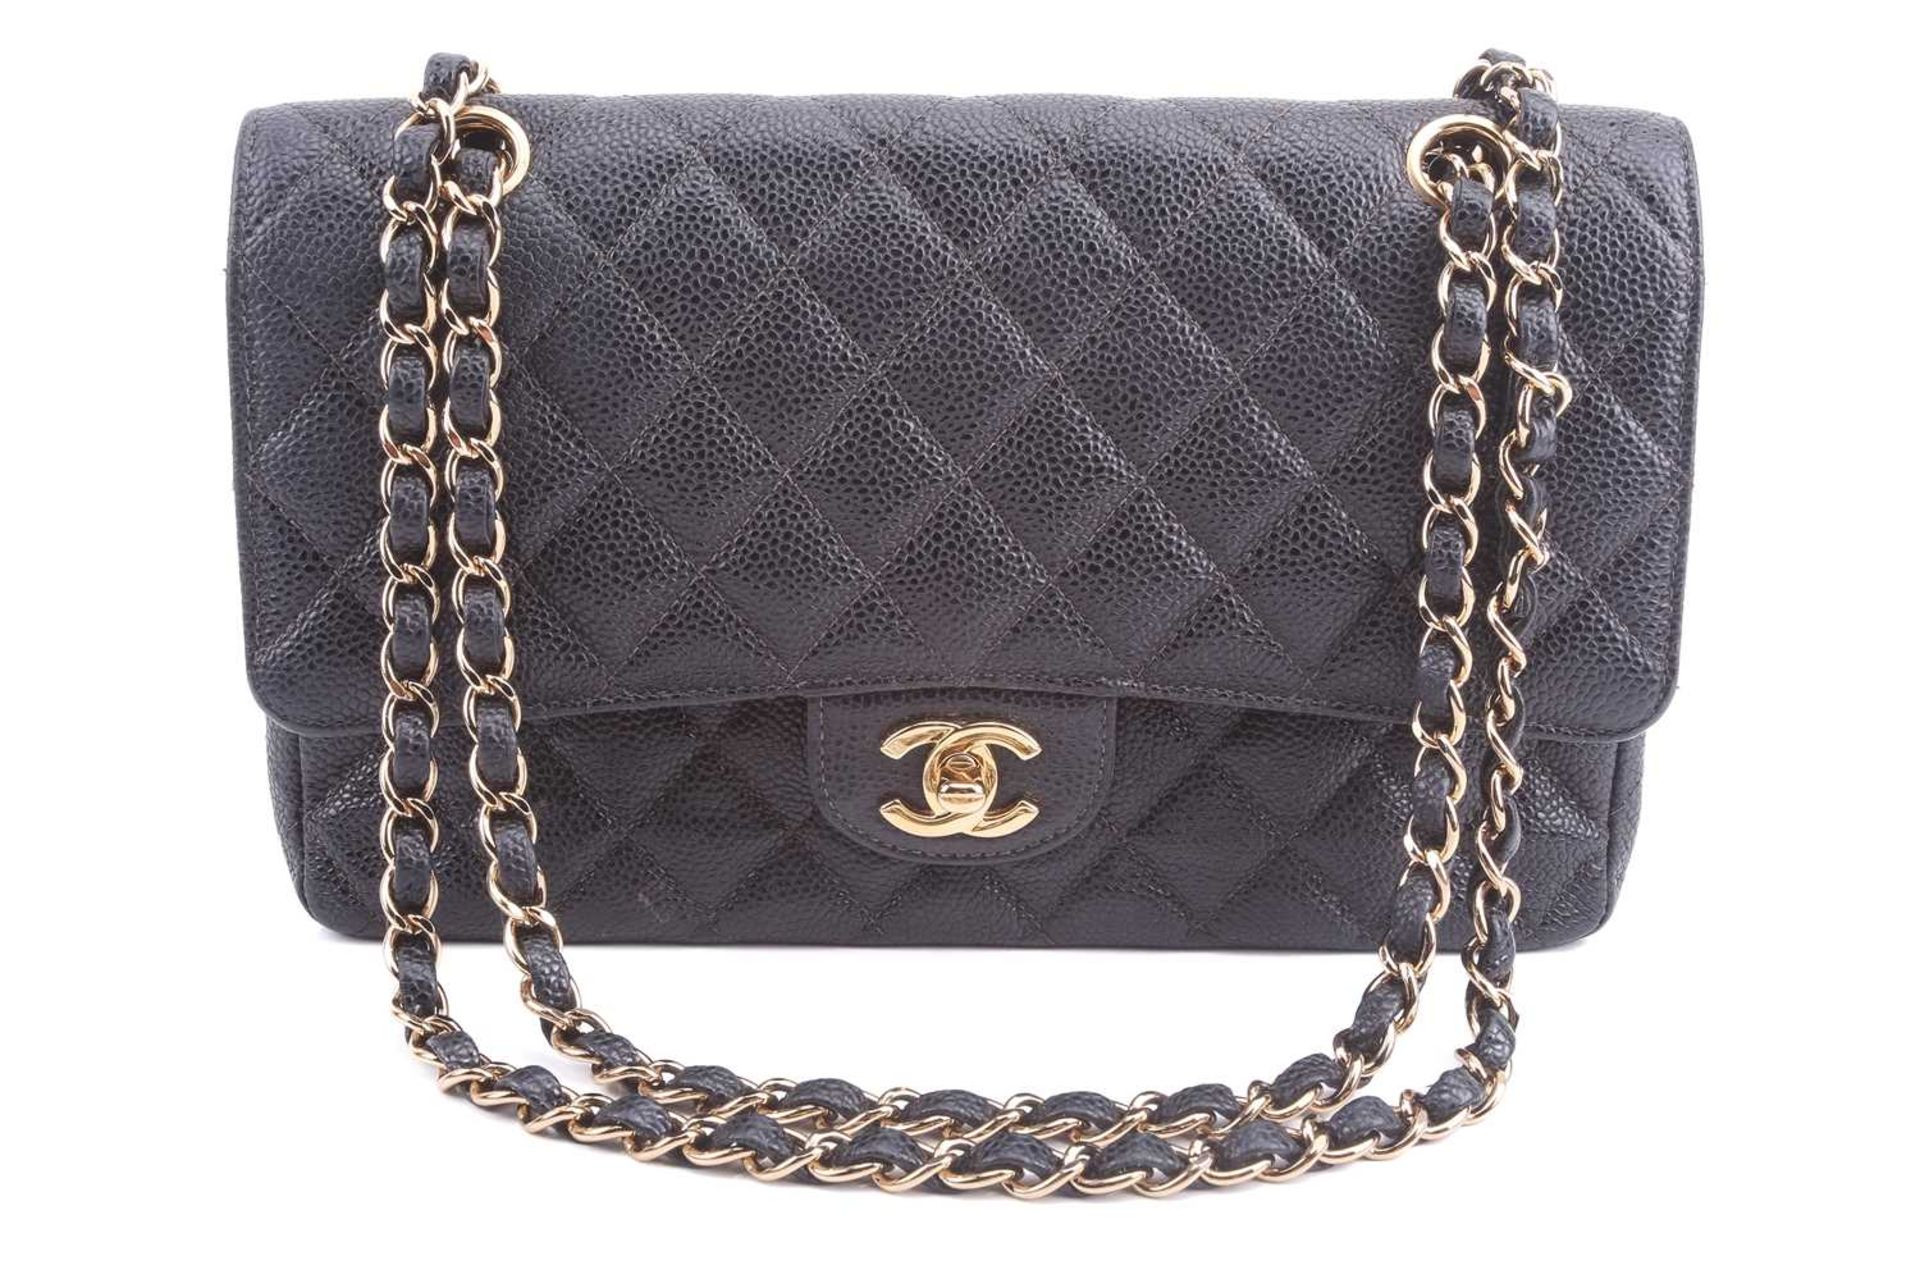 Chanel - a medium classic double flap bag in black diamond-quilted caviar leather, circa 2003, - Image 2 of 11